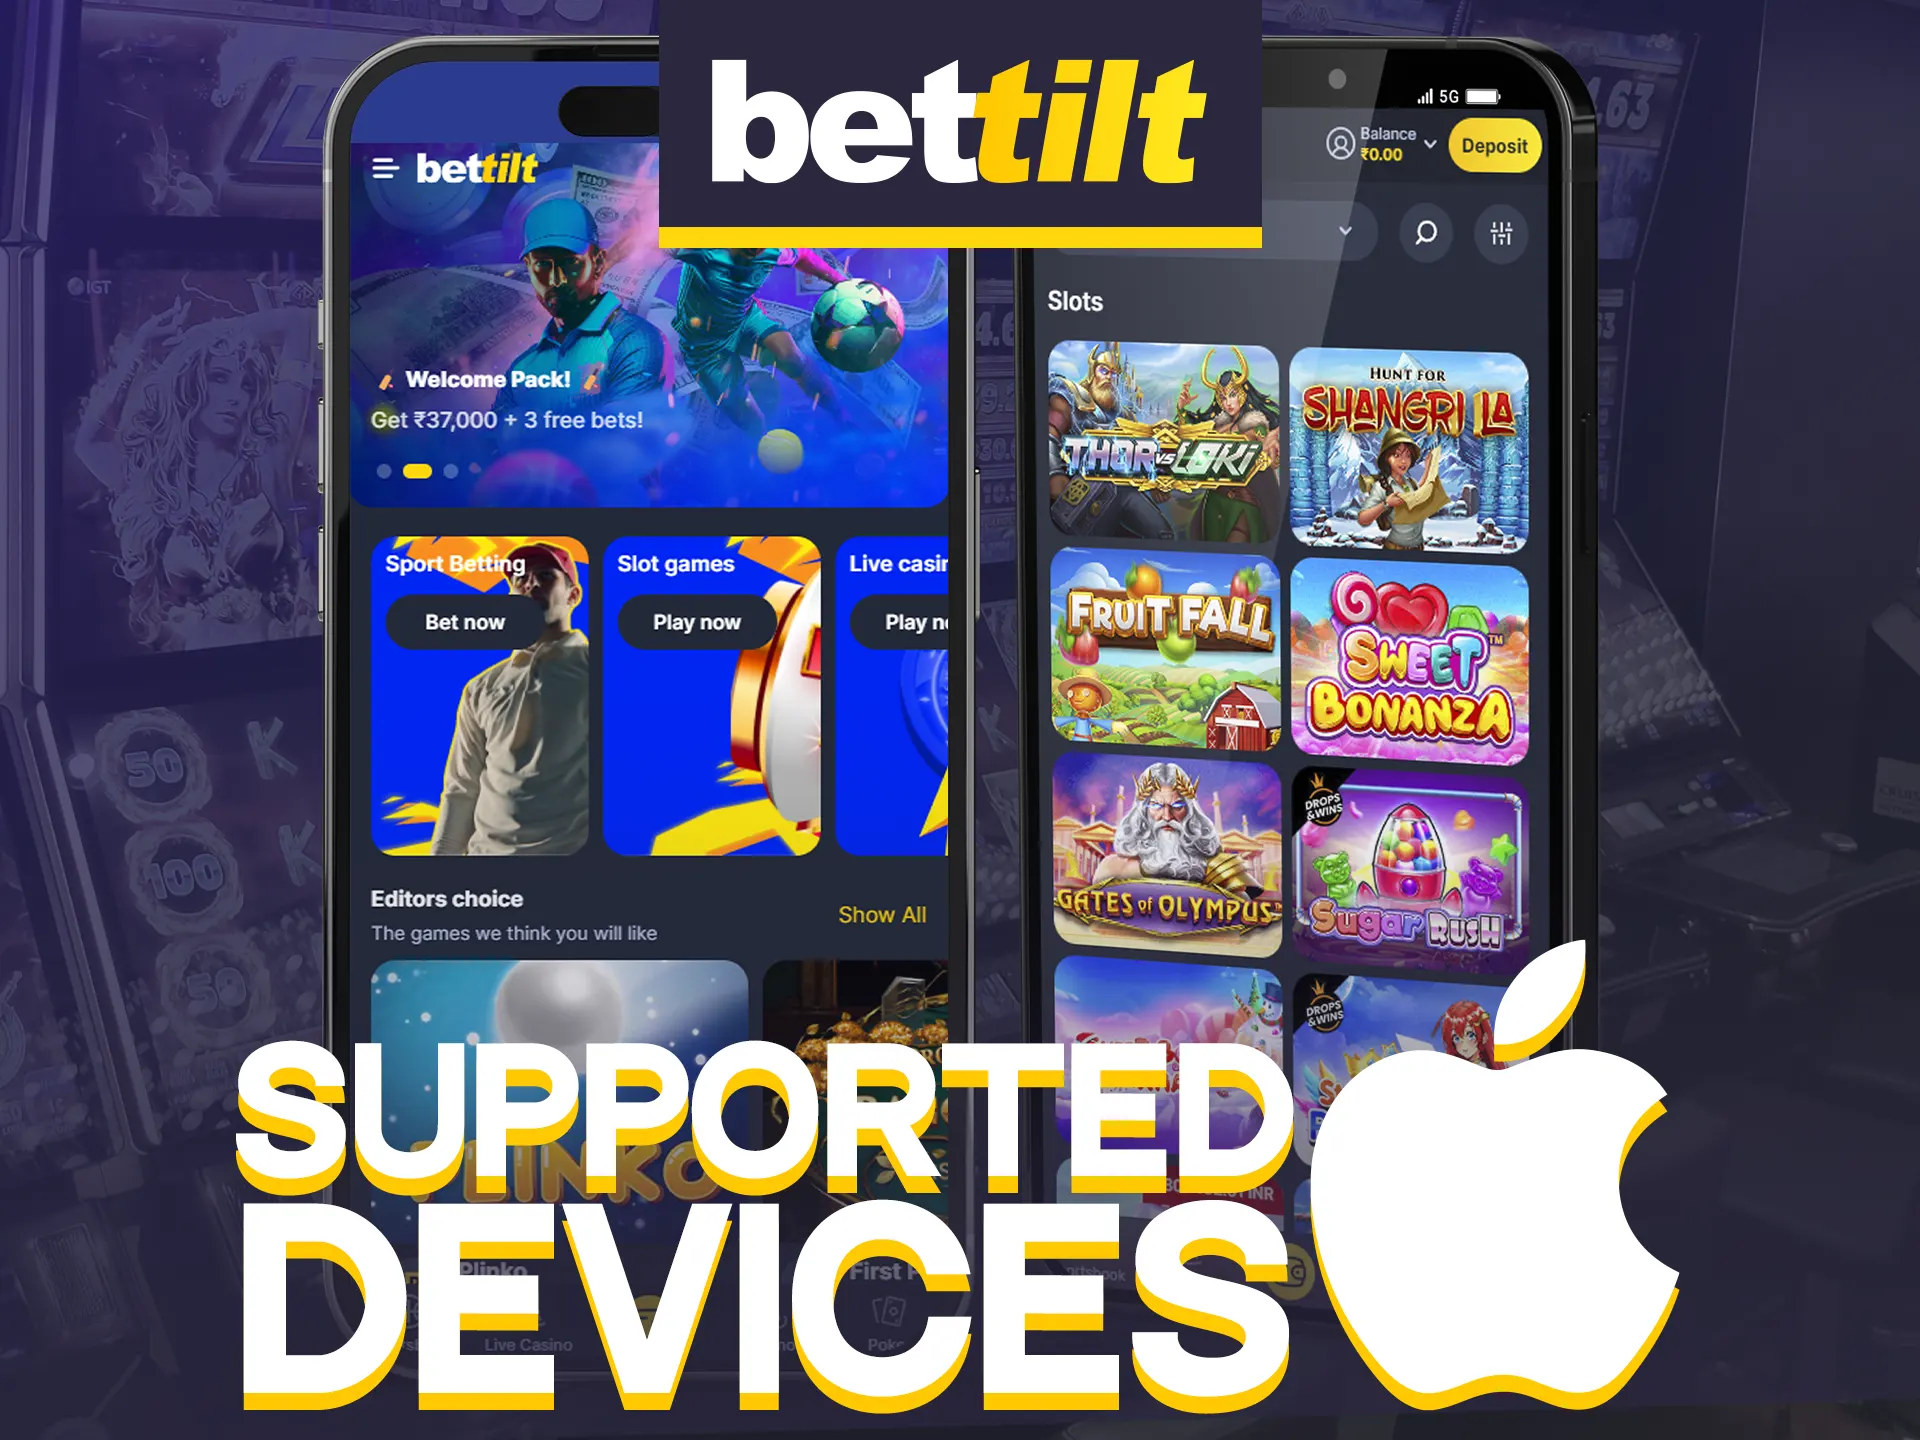 Bettilt's app supports various iOS devices for gaming.